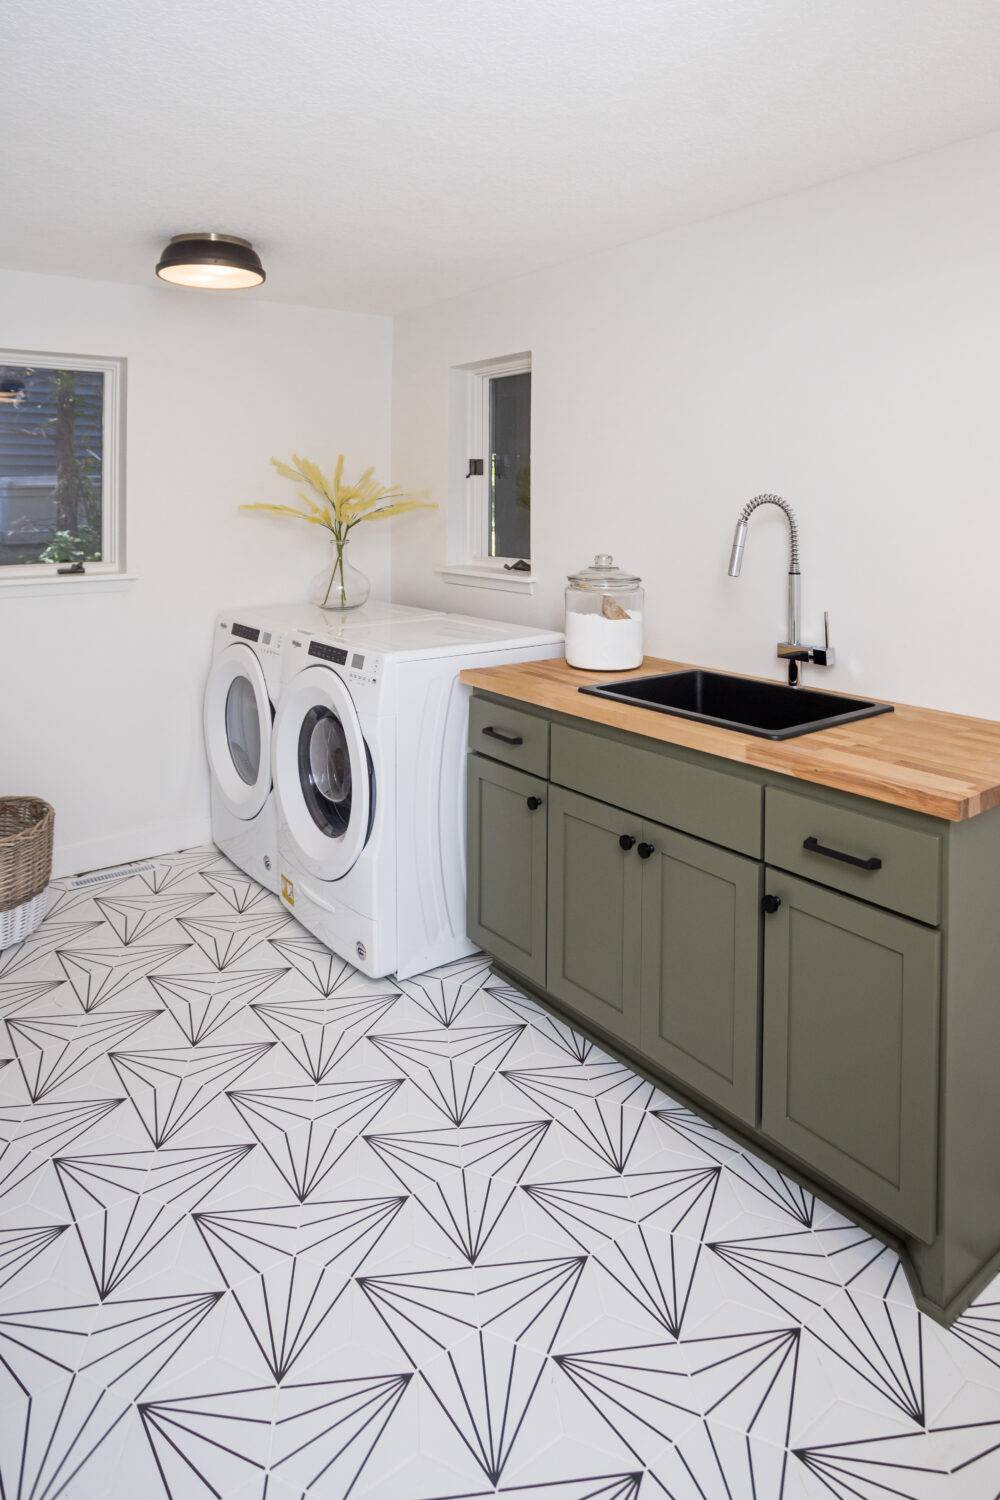 White laundry room with olive green cabinets and black geometric patterned floor tile.
